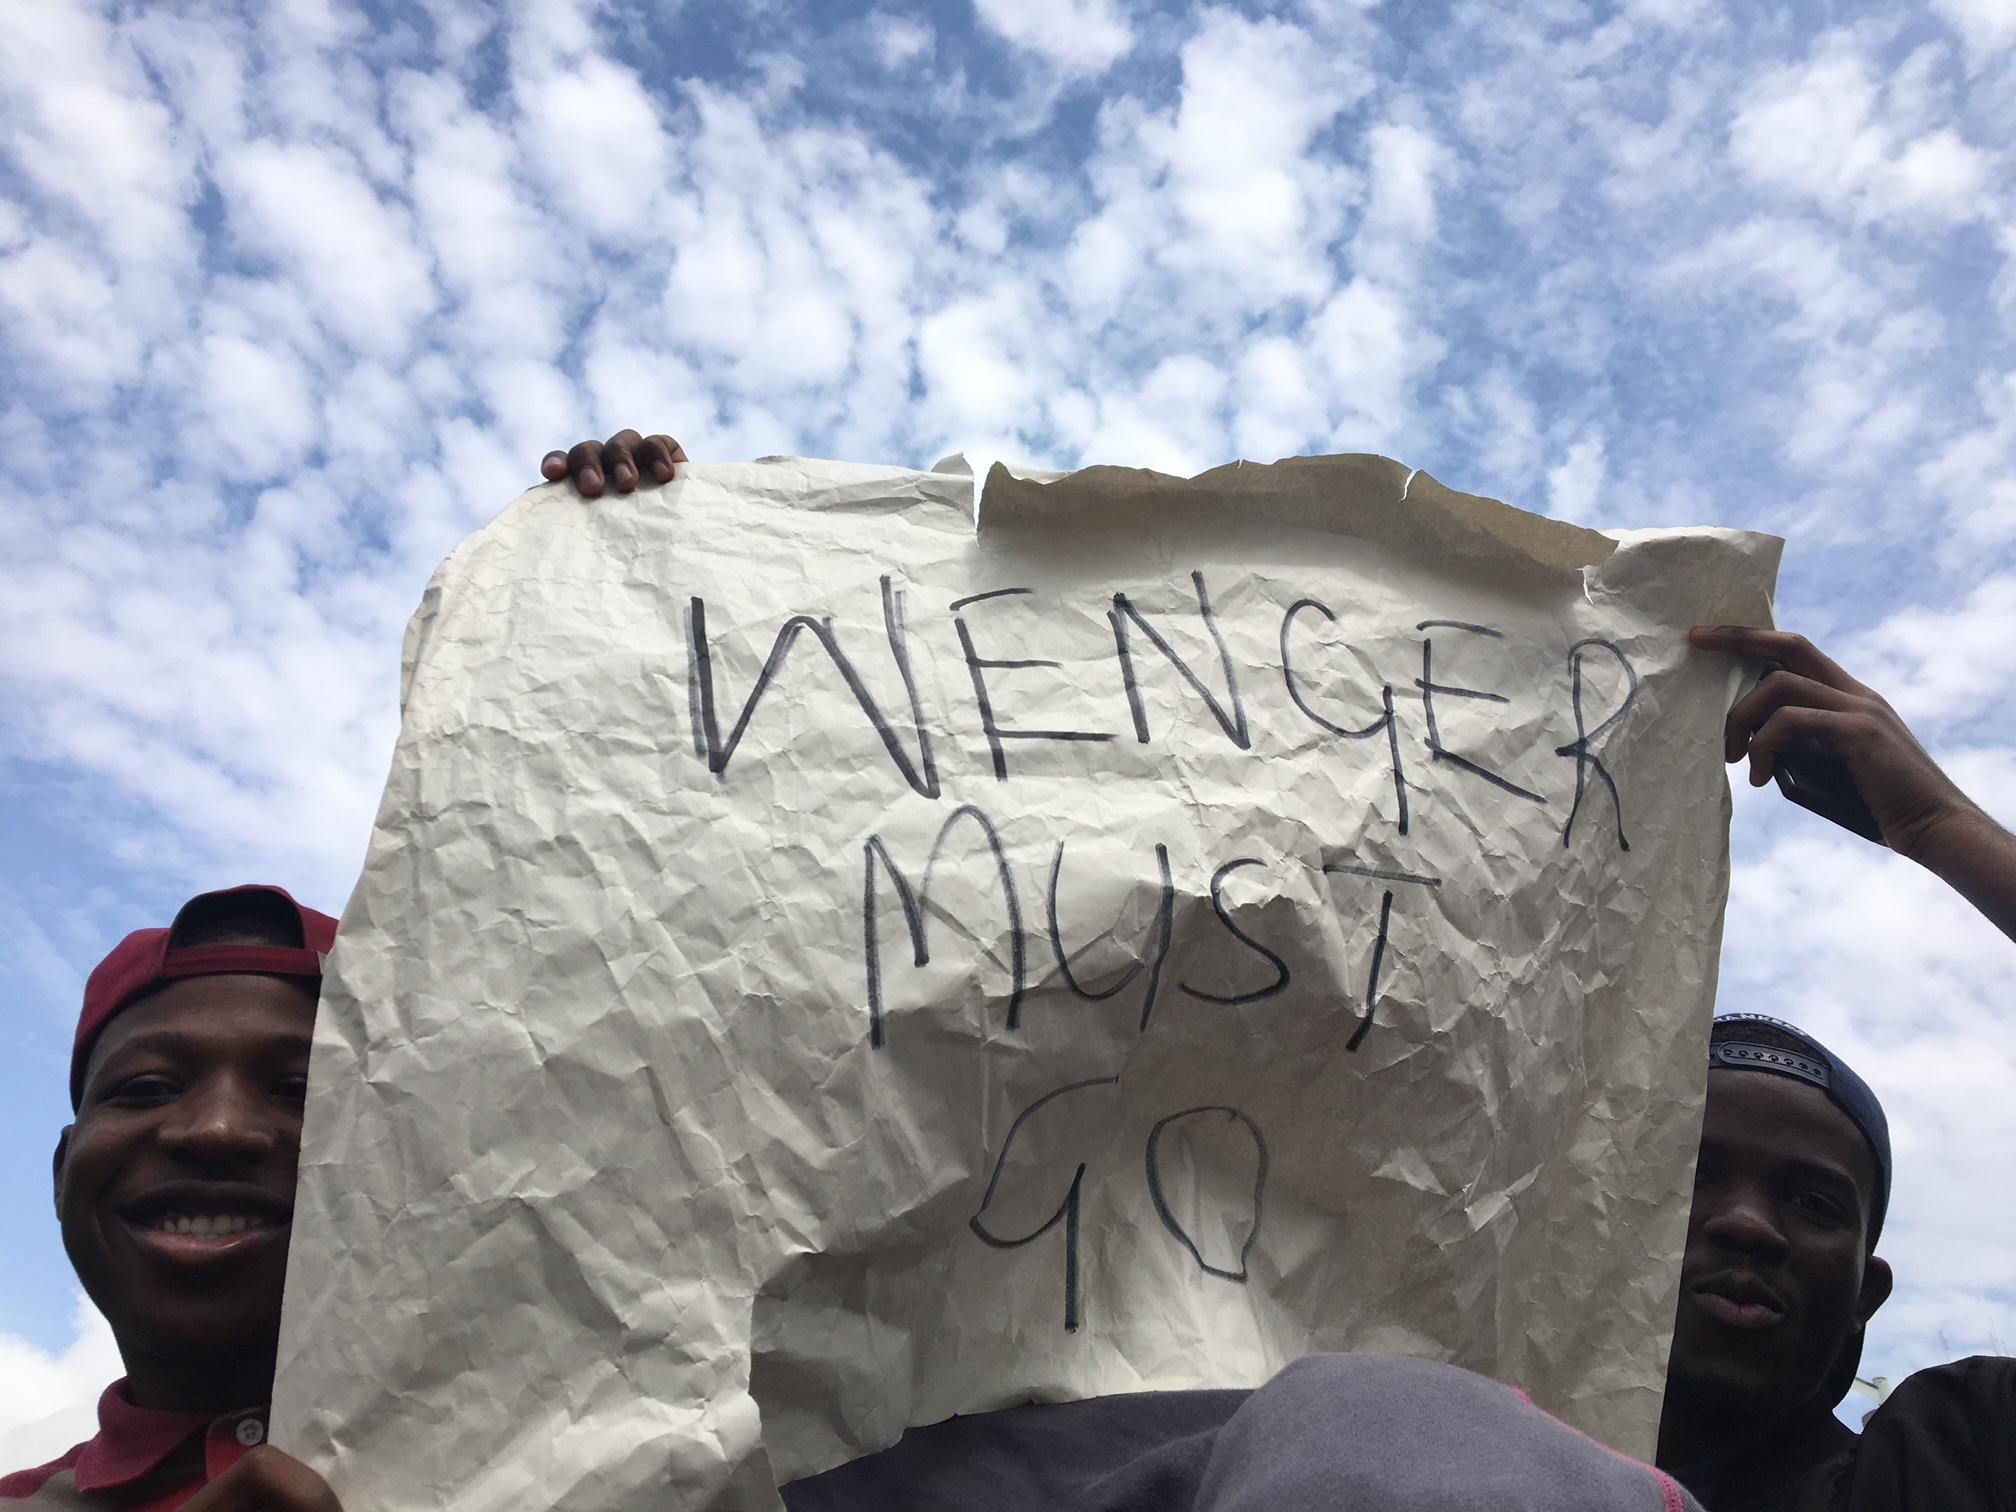 Protesters at a demonstration against Robert Mugabe hold a sign calling for Arsenal manager Arsene Wenger’s removal